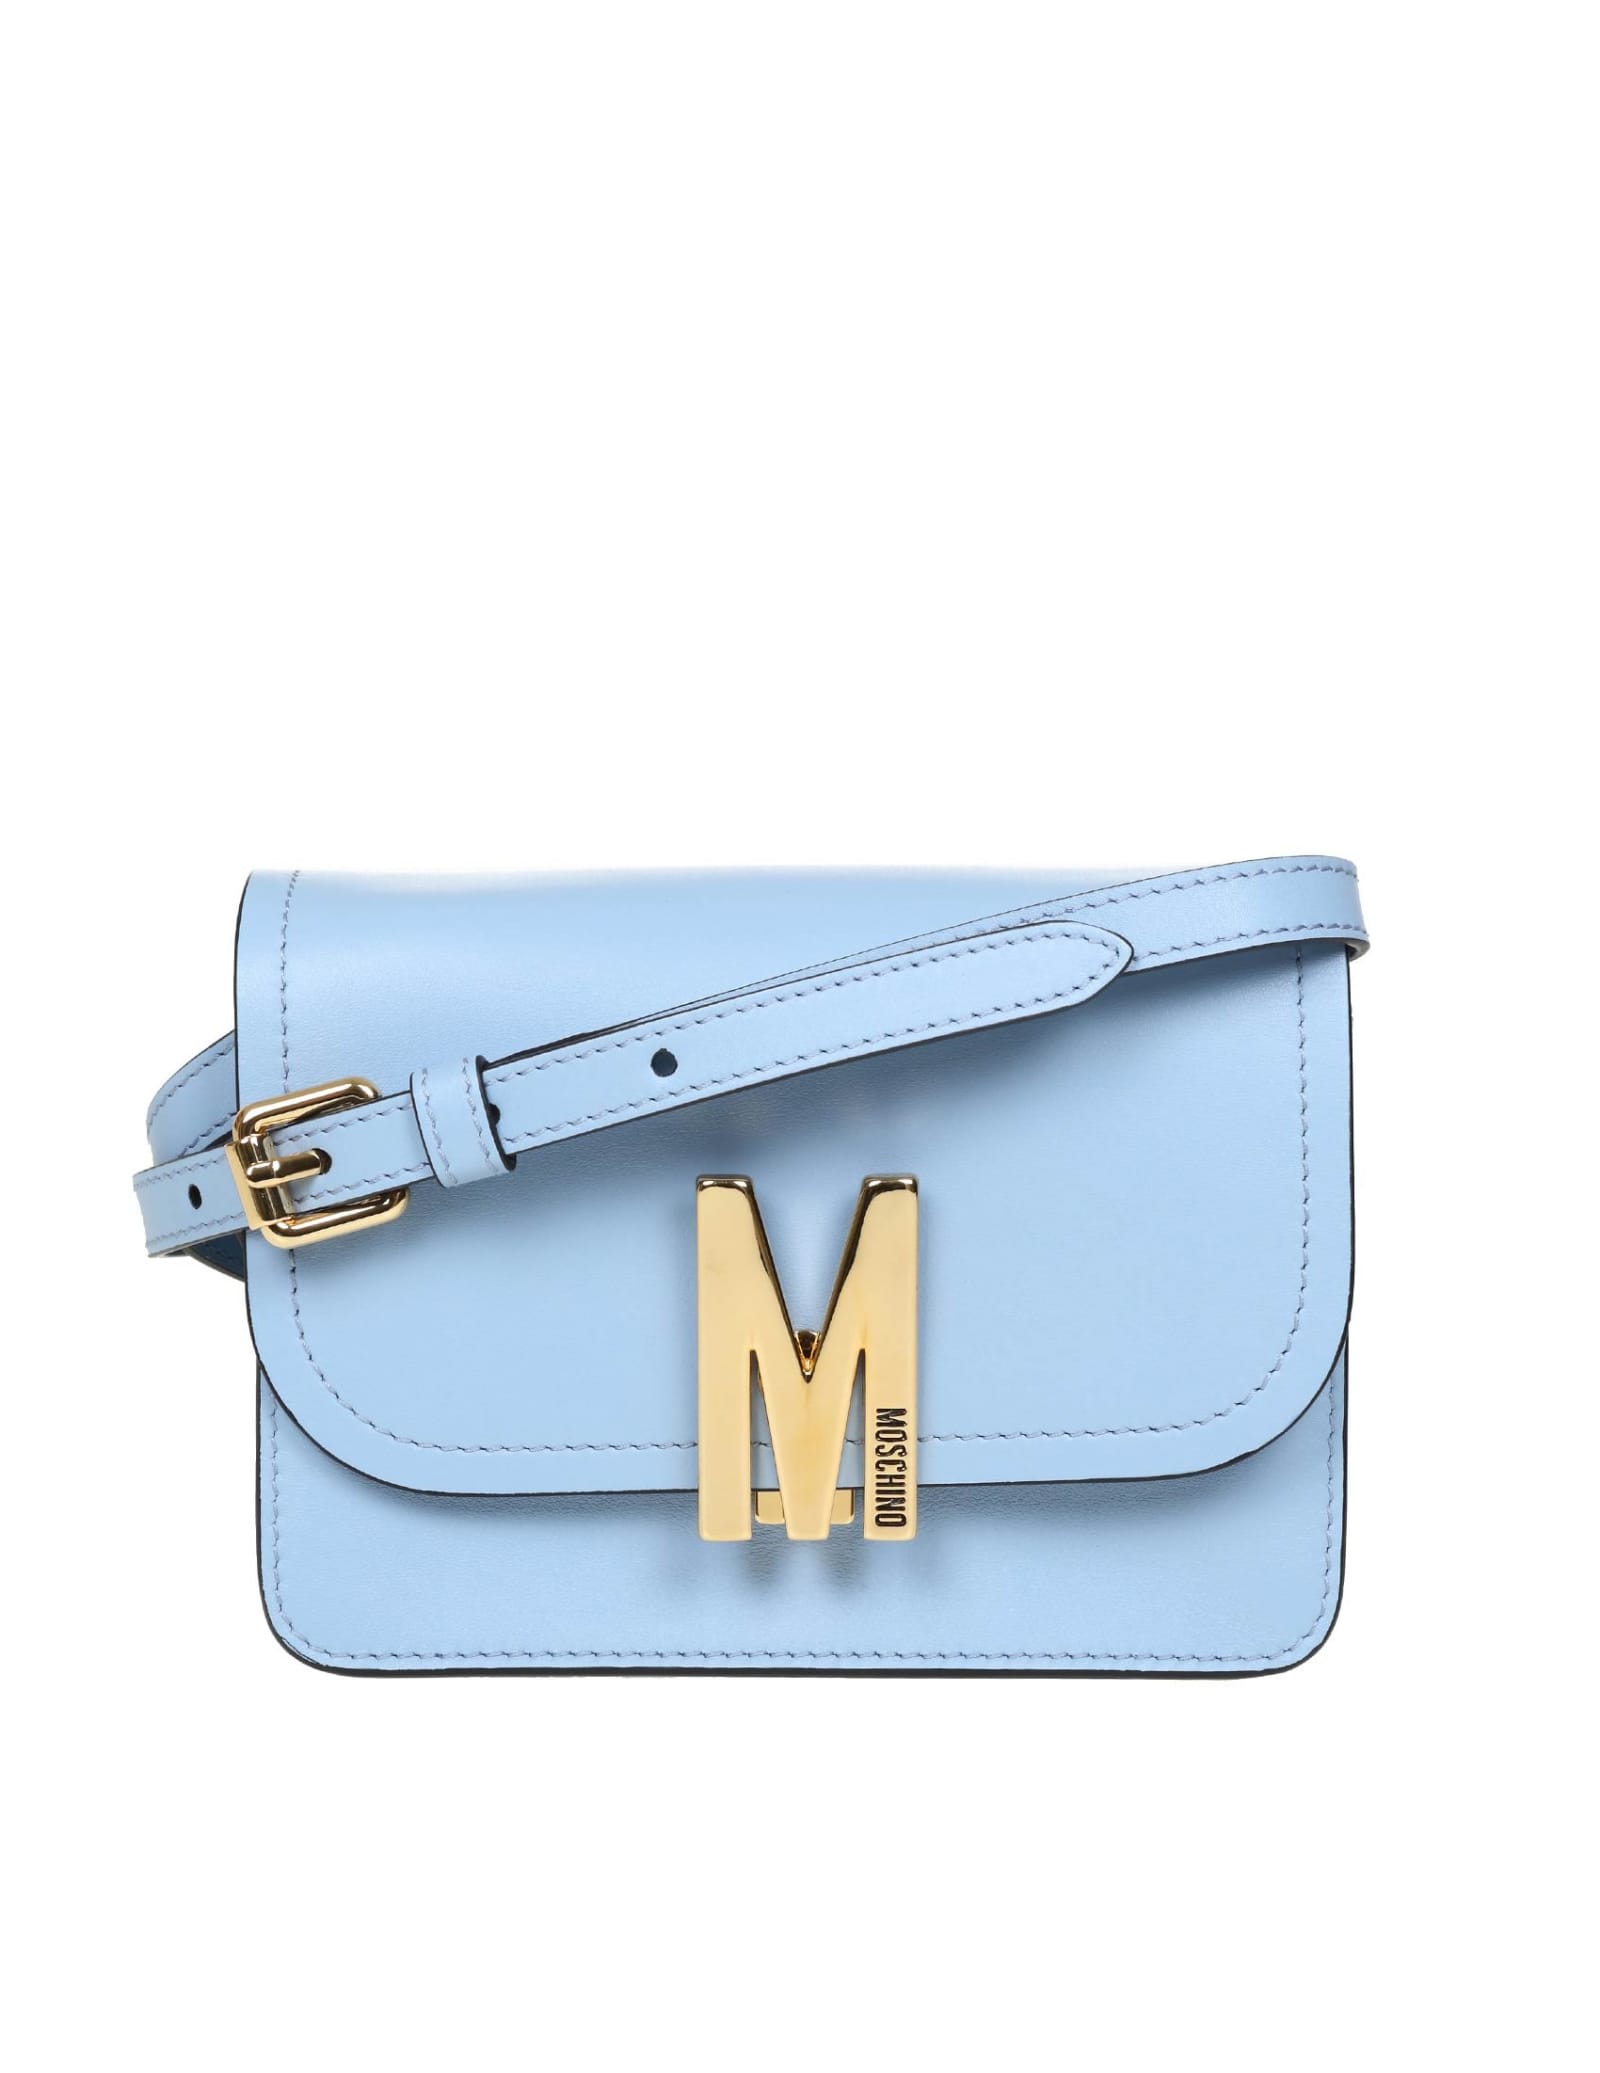 Moschino Shoulder Bag In Light Blue Calf Leather